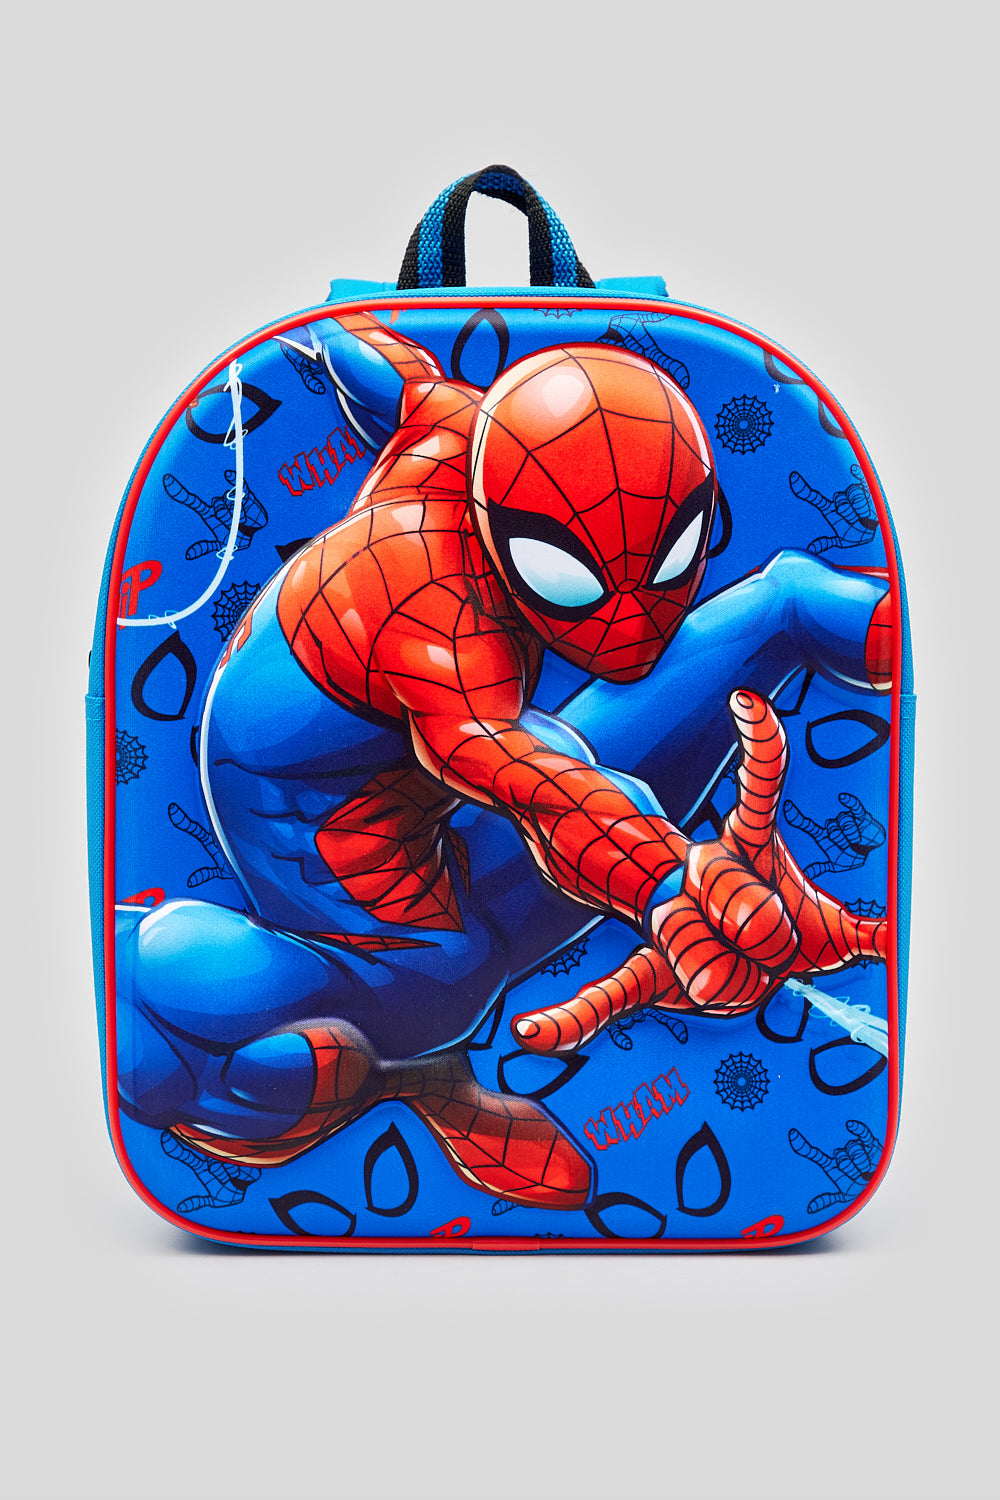 Winkycoo Ultra Premium, Big Size Super Heroes Patch Bag - Spider Man  Character Red School Bag - Winkycoo